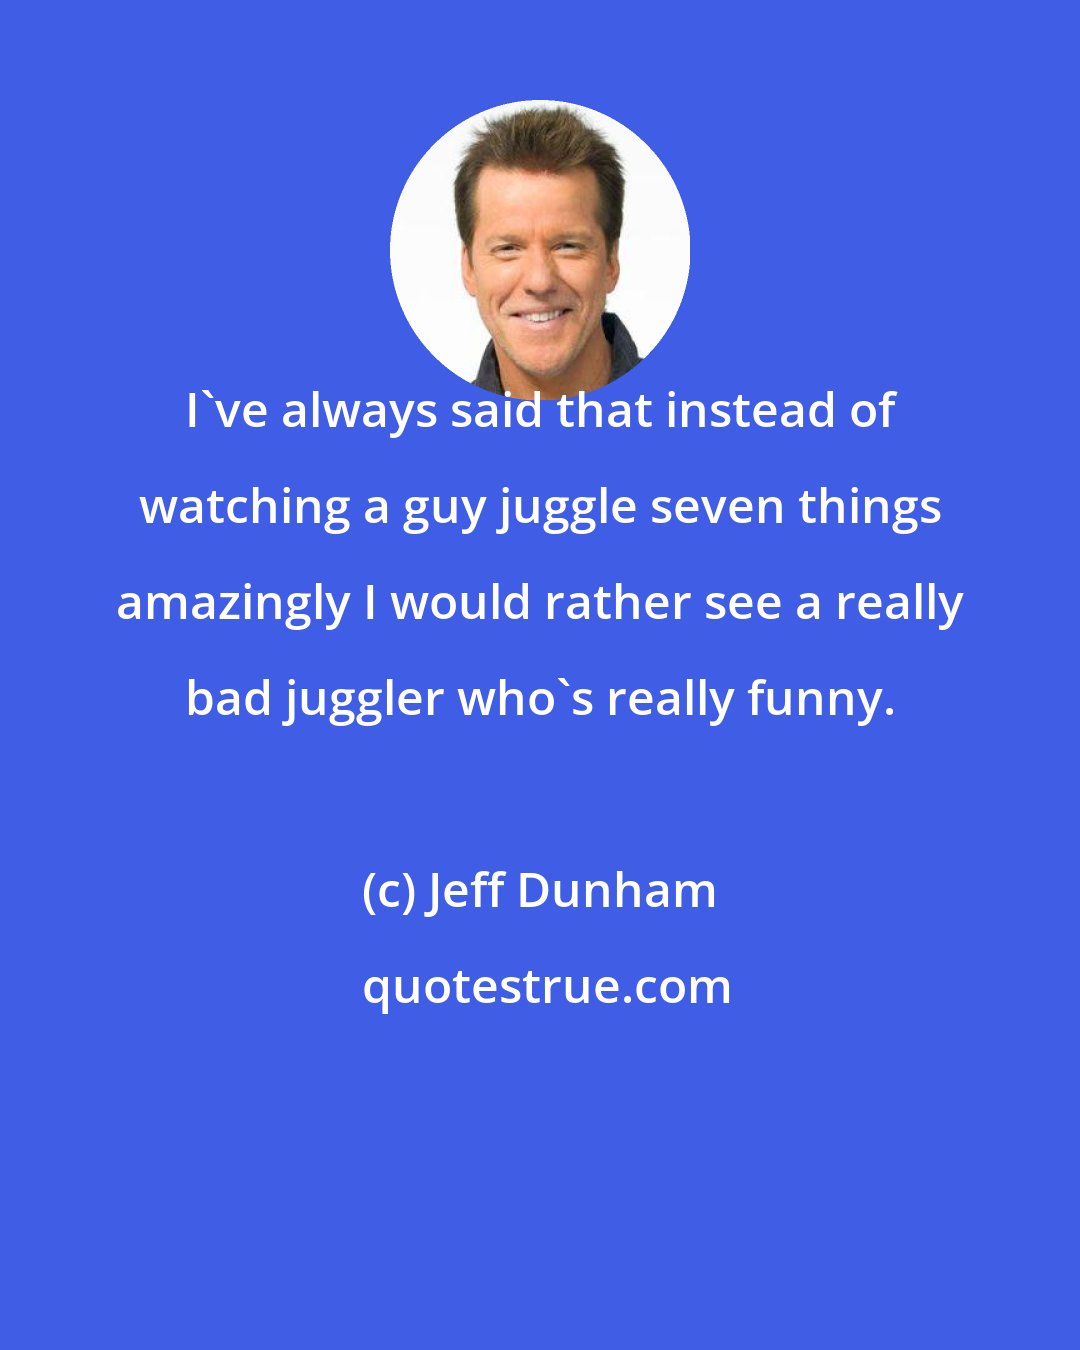 Jeff Dunham: I've always said that instead of watching a guy juggle seven things amazingly I would rather see a really bad juggler who's really funny.